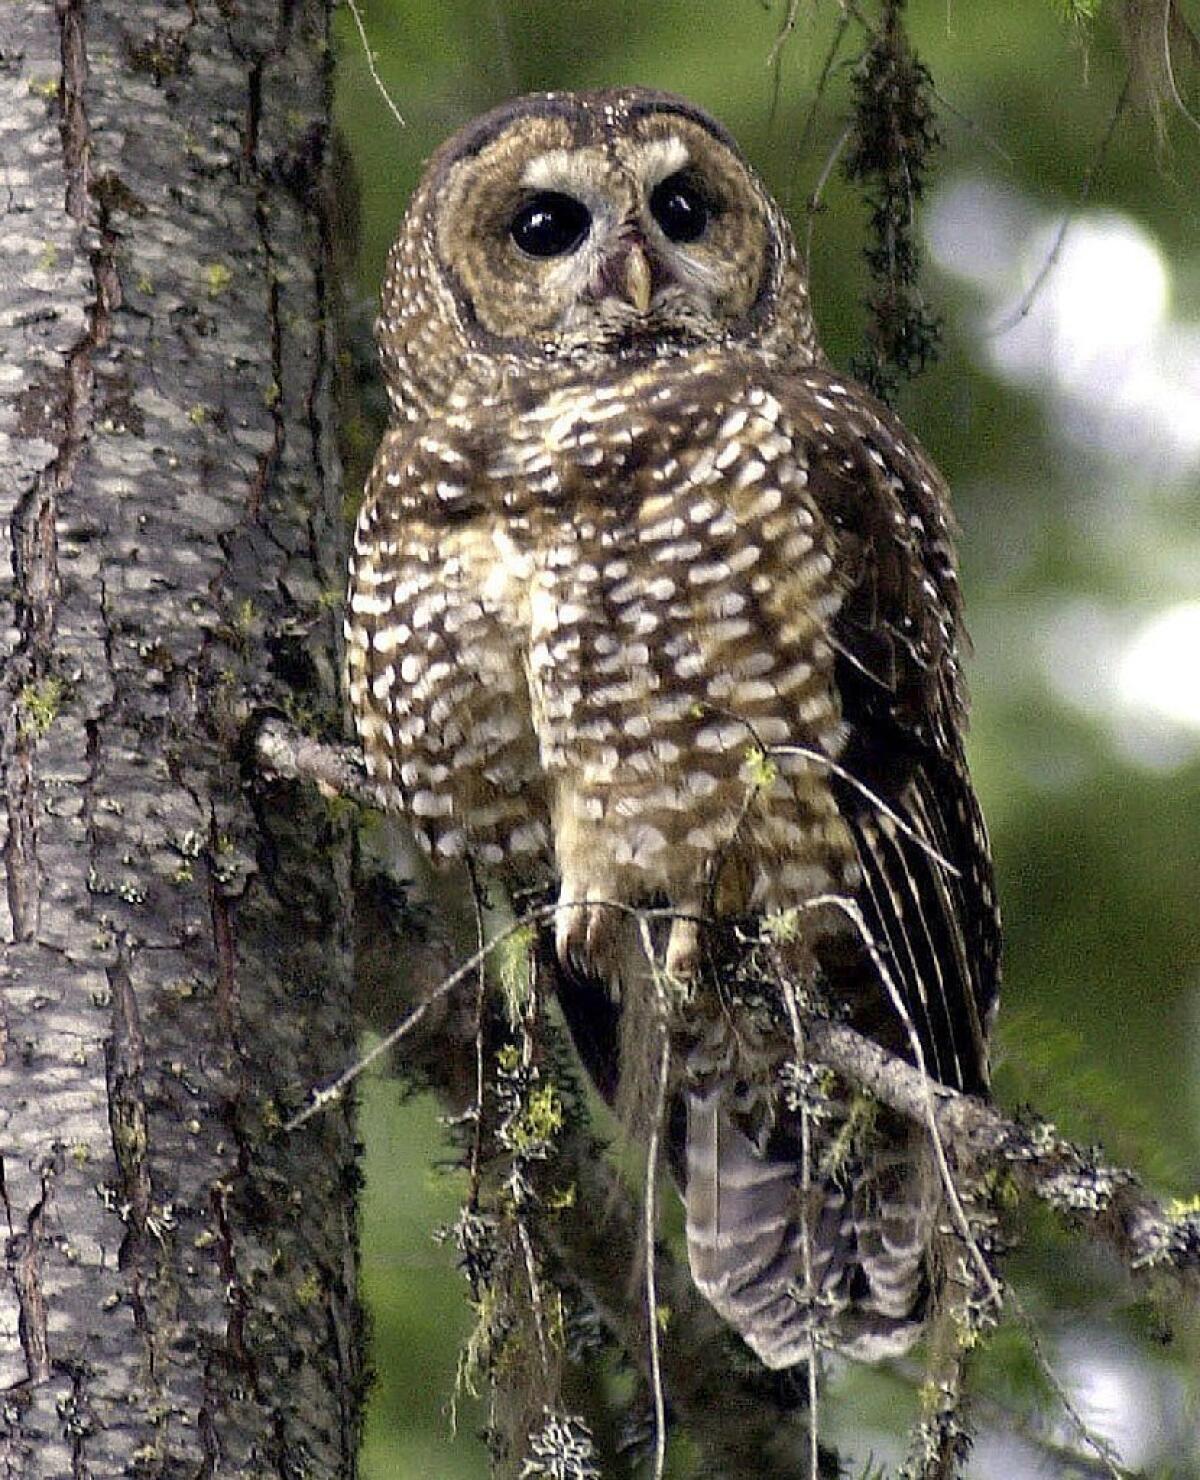 Northern spotted owls are being crowded out of old growth forests in the Northwest by invading barred owls.